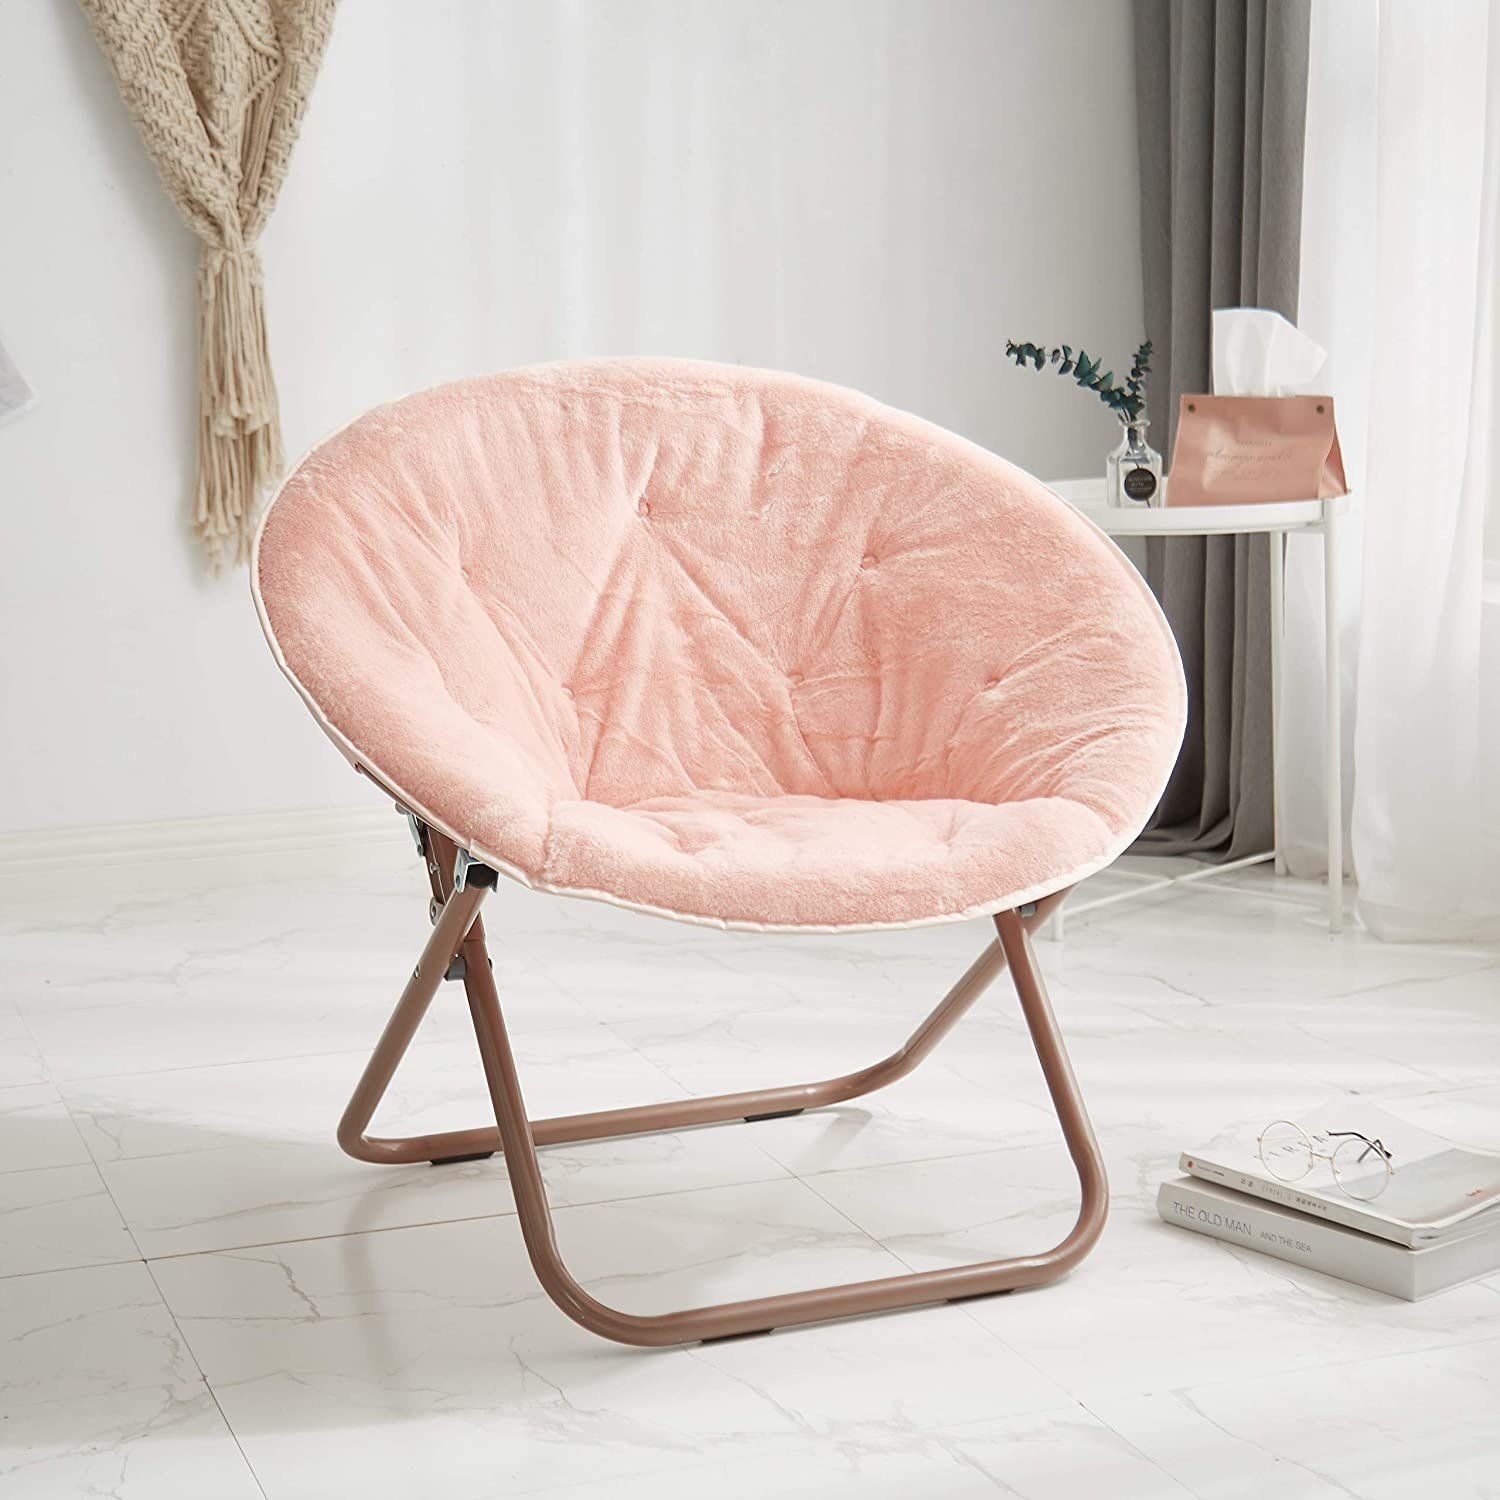 Pink folding saucer chair placed in room